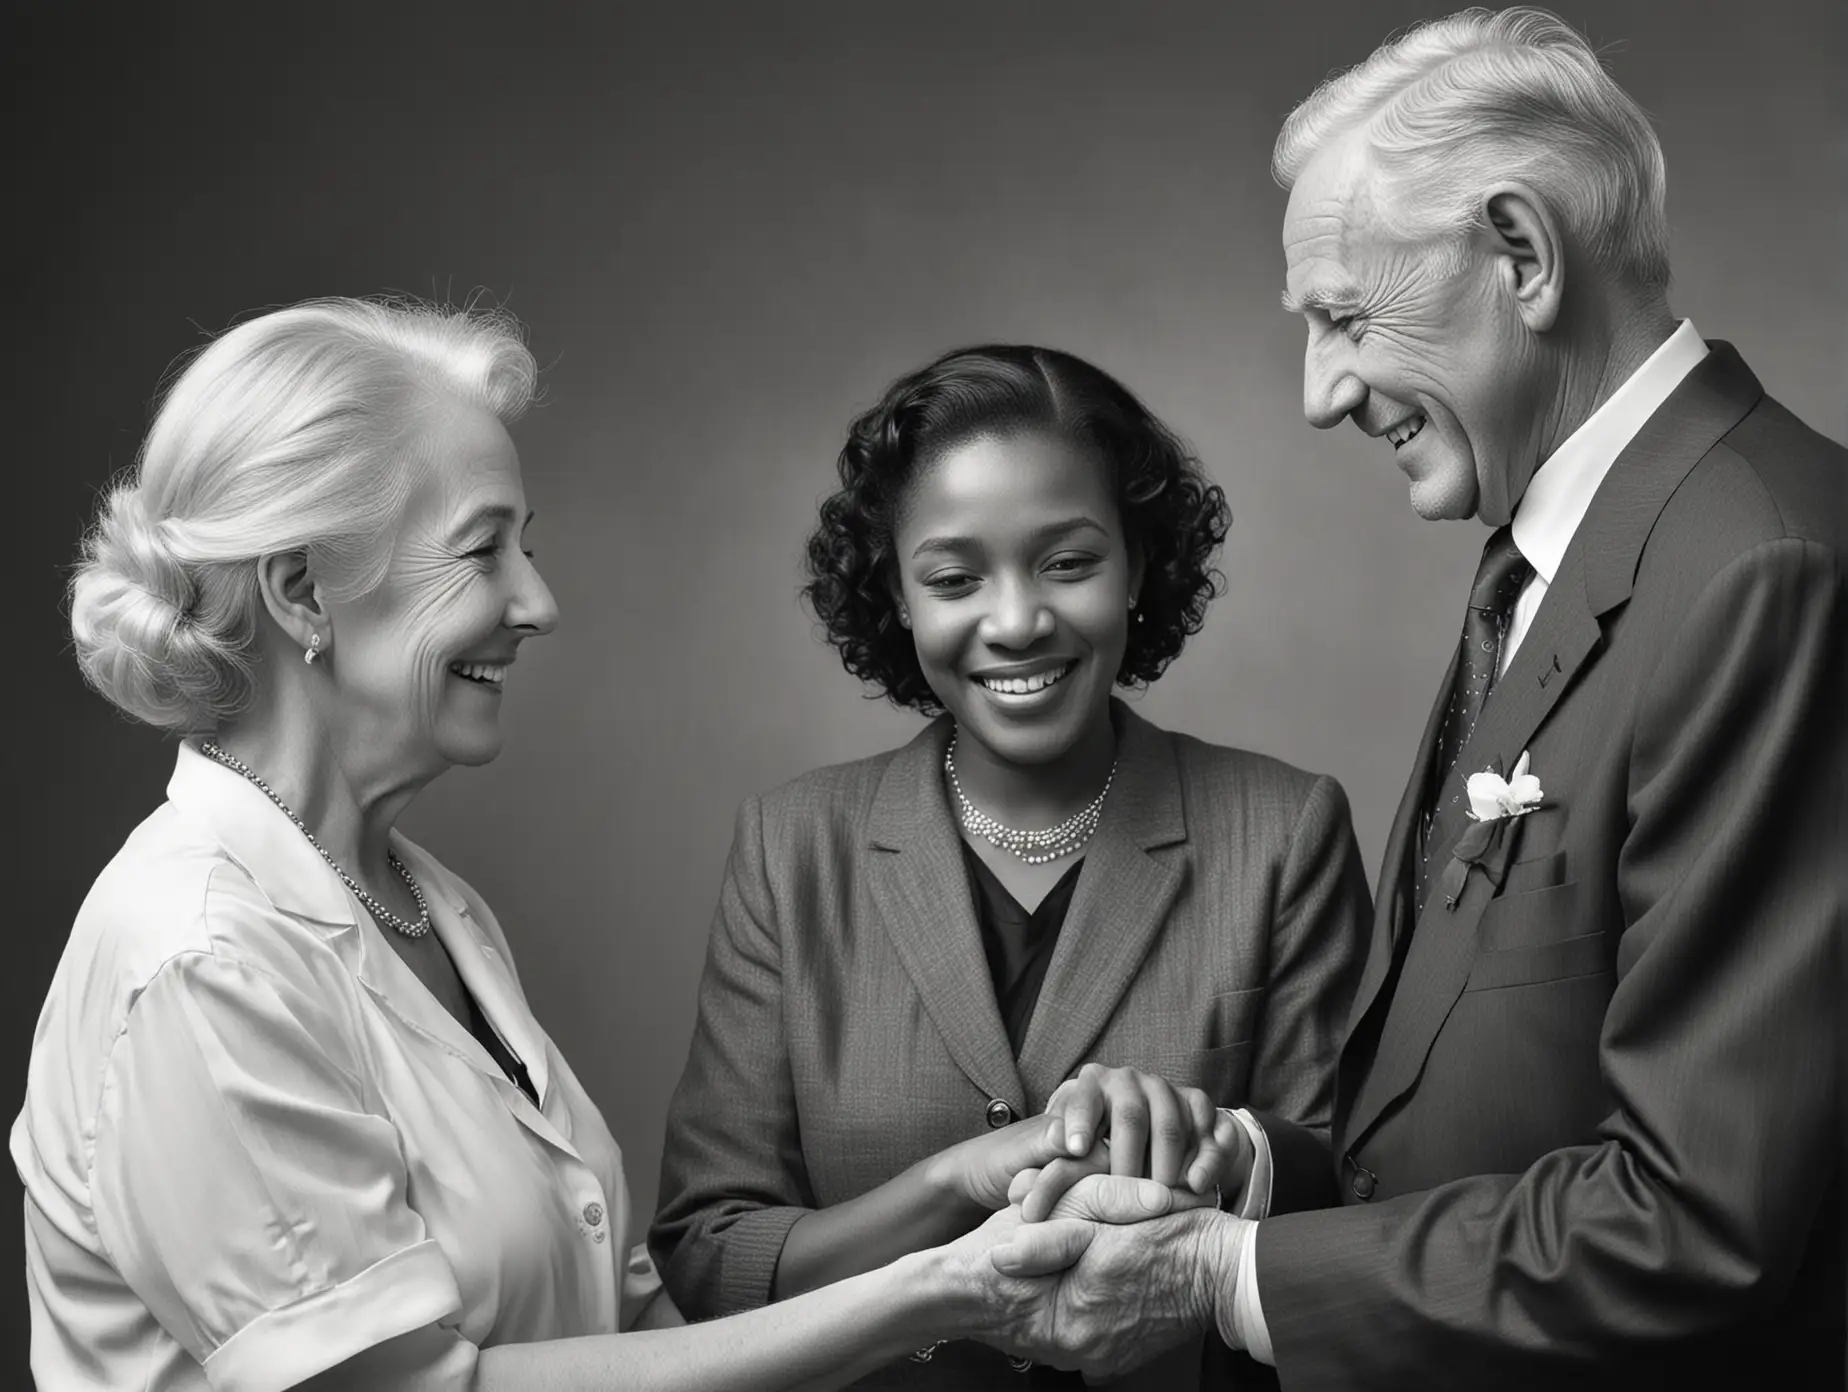 Elderly-White-Man-Congratulating-Young-Black-Married-Couple-in-Realistic-Black-and-White-Photograph